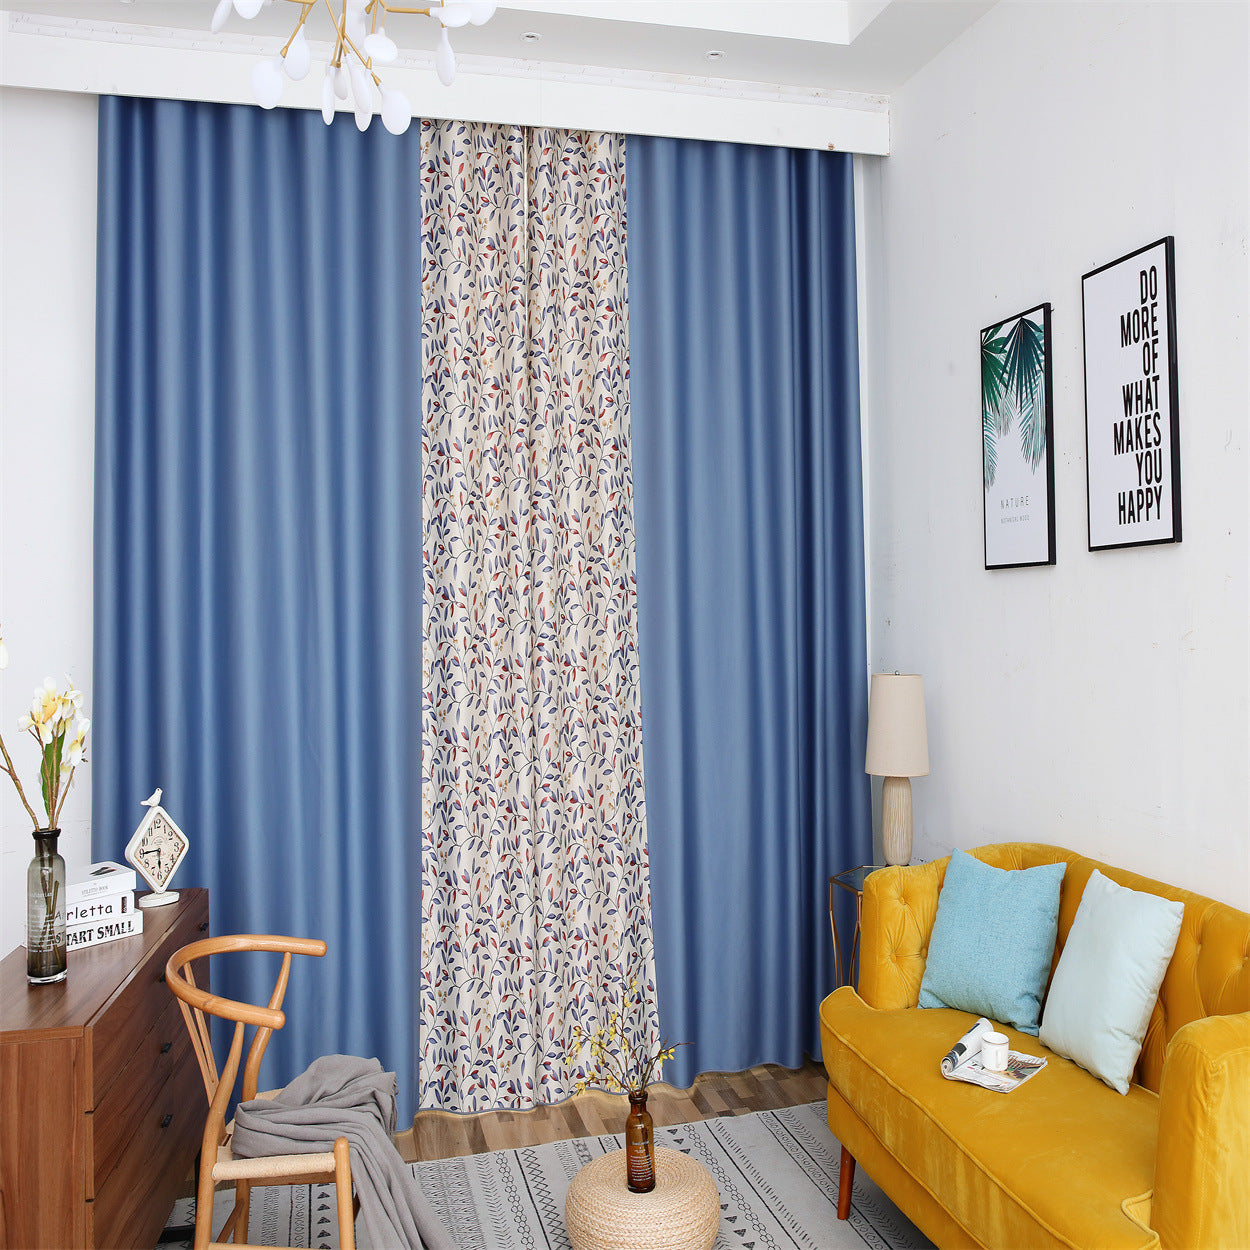 DIHINHOME Home Textile Pastoral Curtain DIHIN HOME High Quality Colorful Leaves Printed,Blackout Grommet Window Curtain for Living Room ,52x63-inch,1 Panel